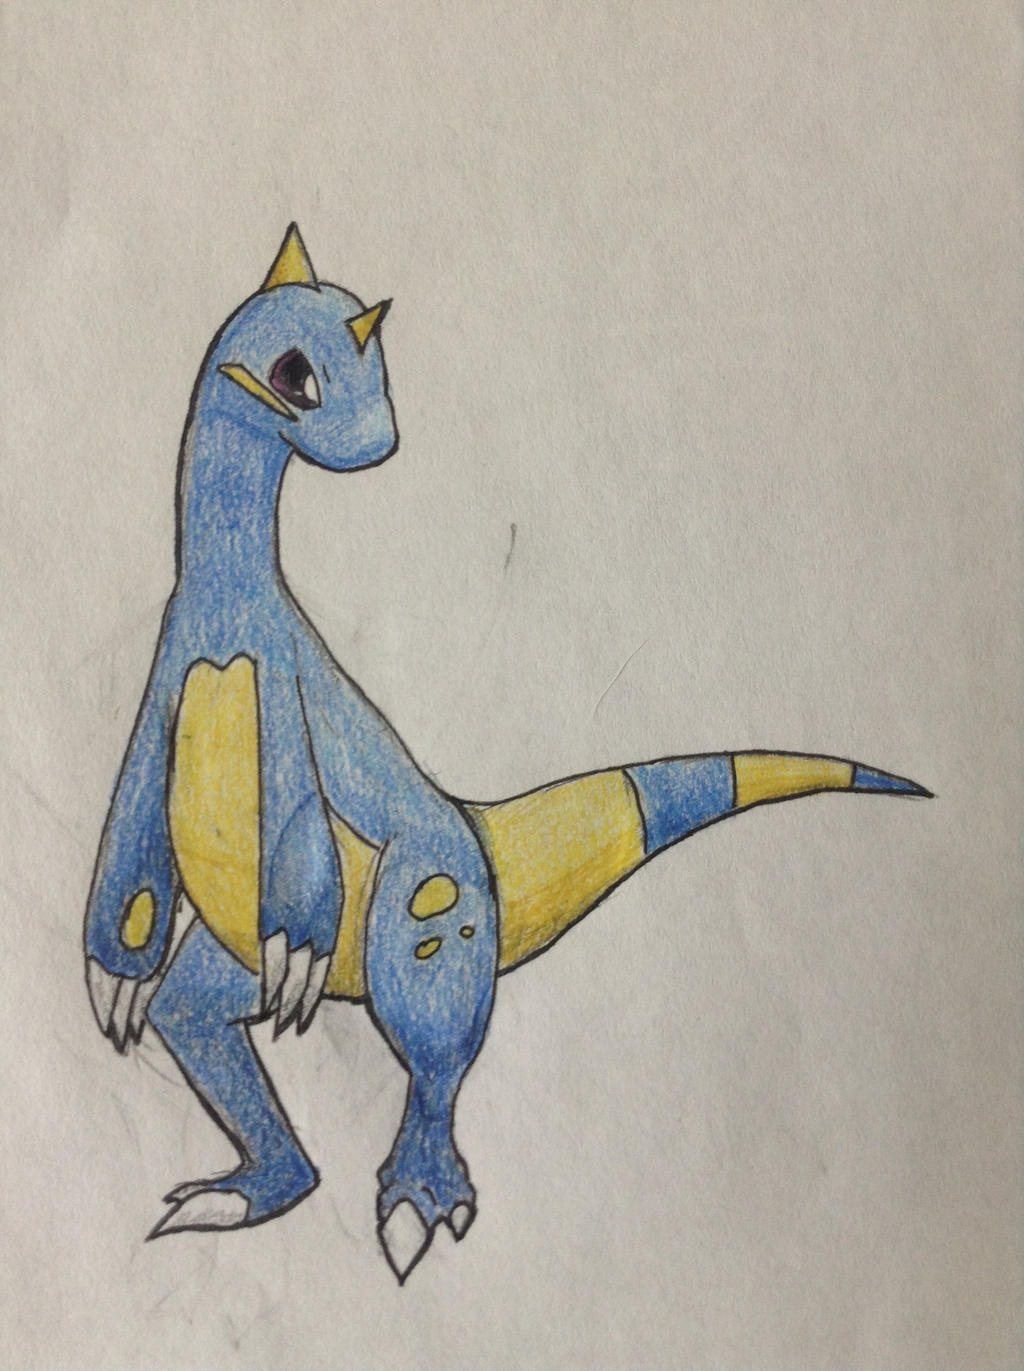 New Fakemon: Voltile